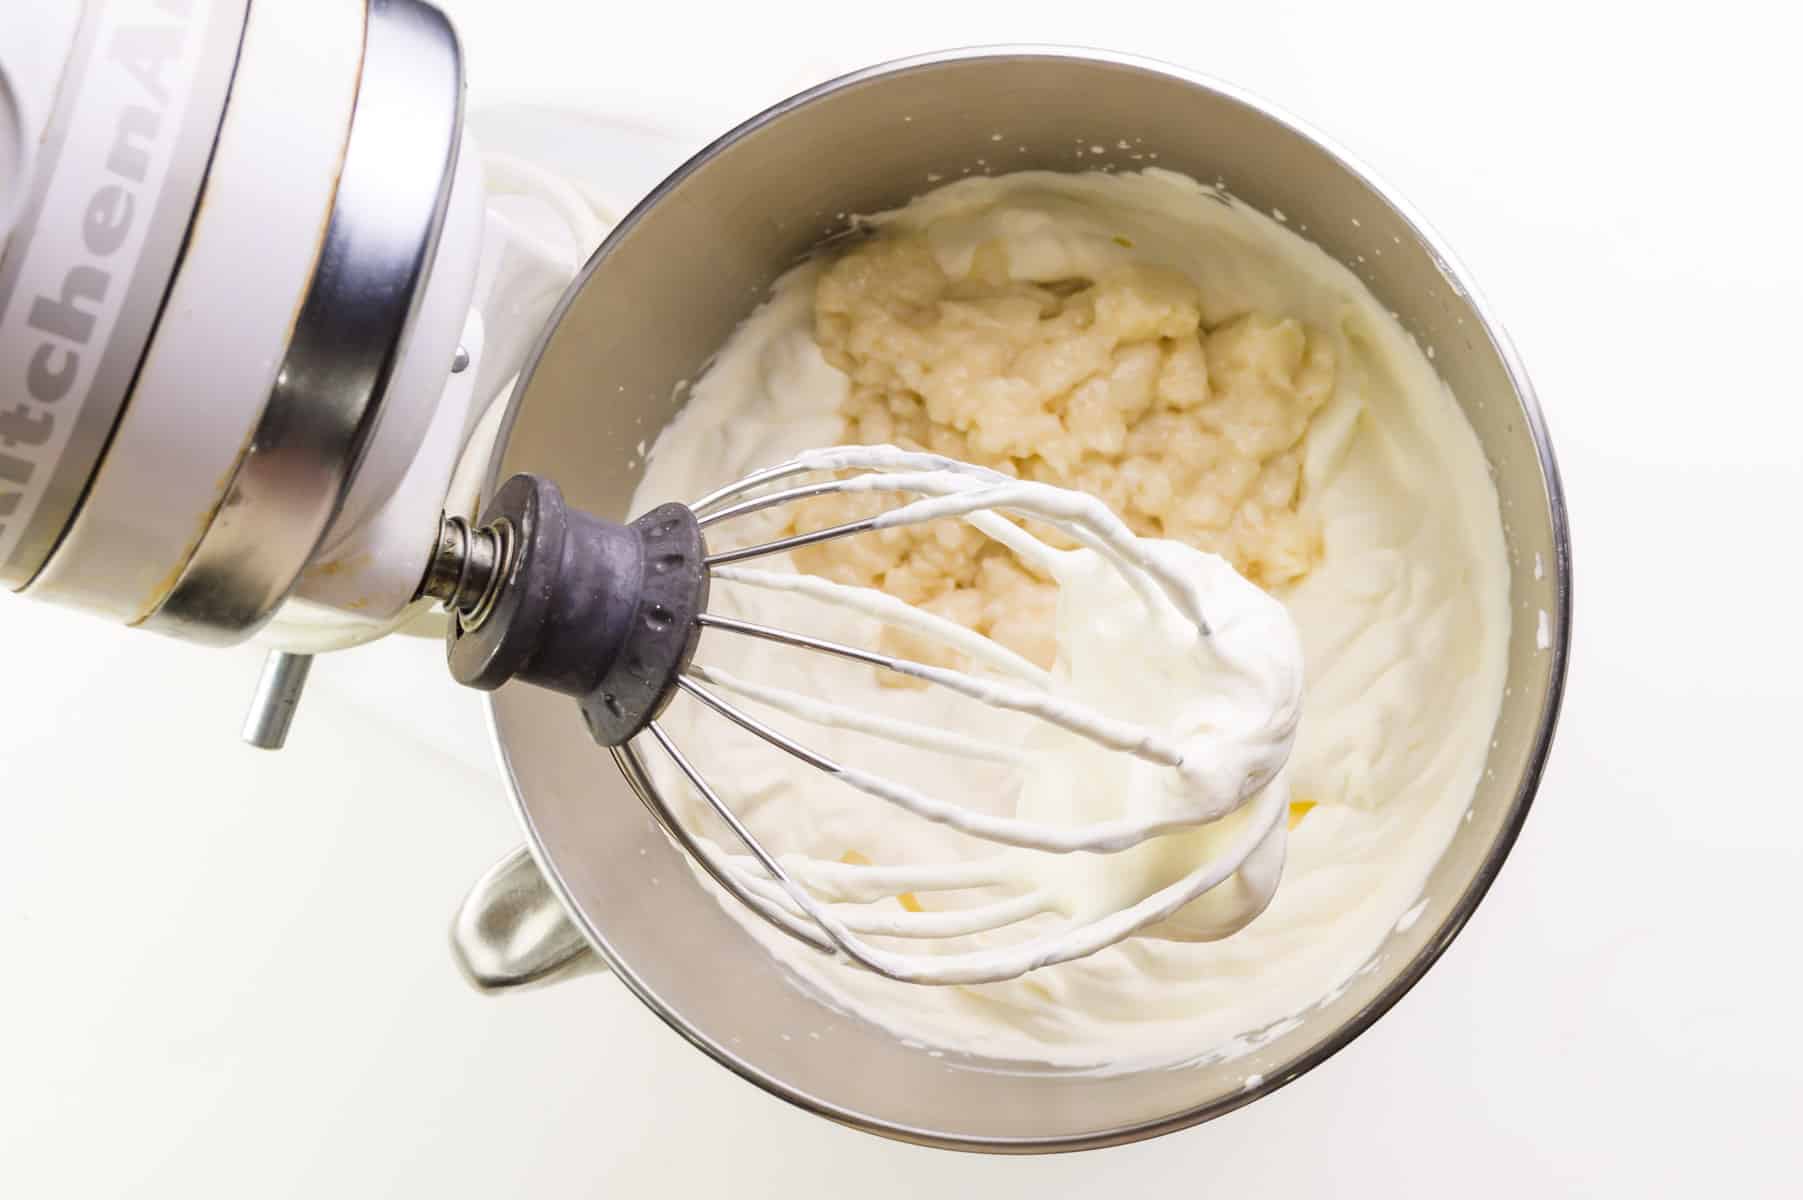 A marshmallow mixture is added to the whipped cream in the mixing bowl of a stand mixer.